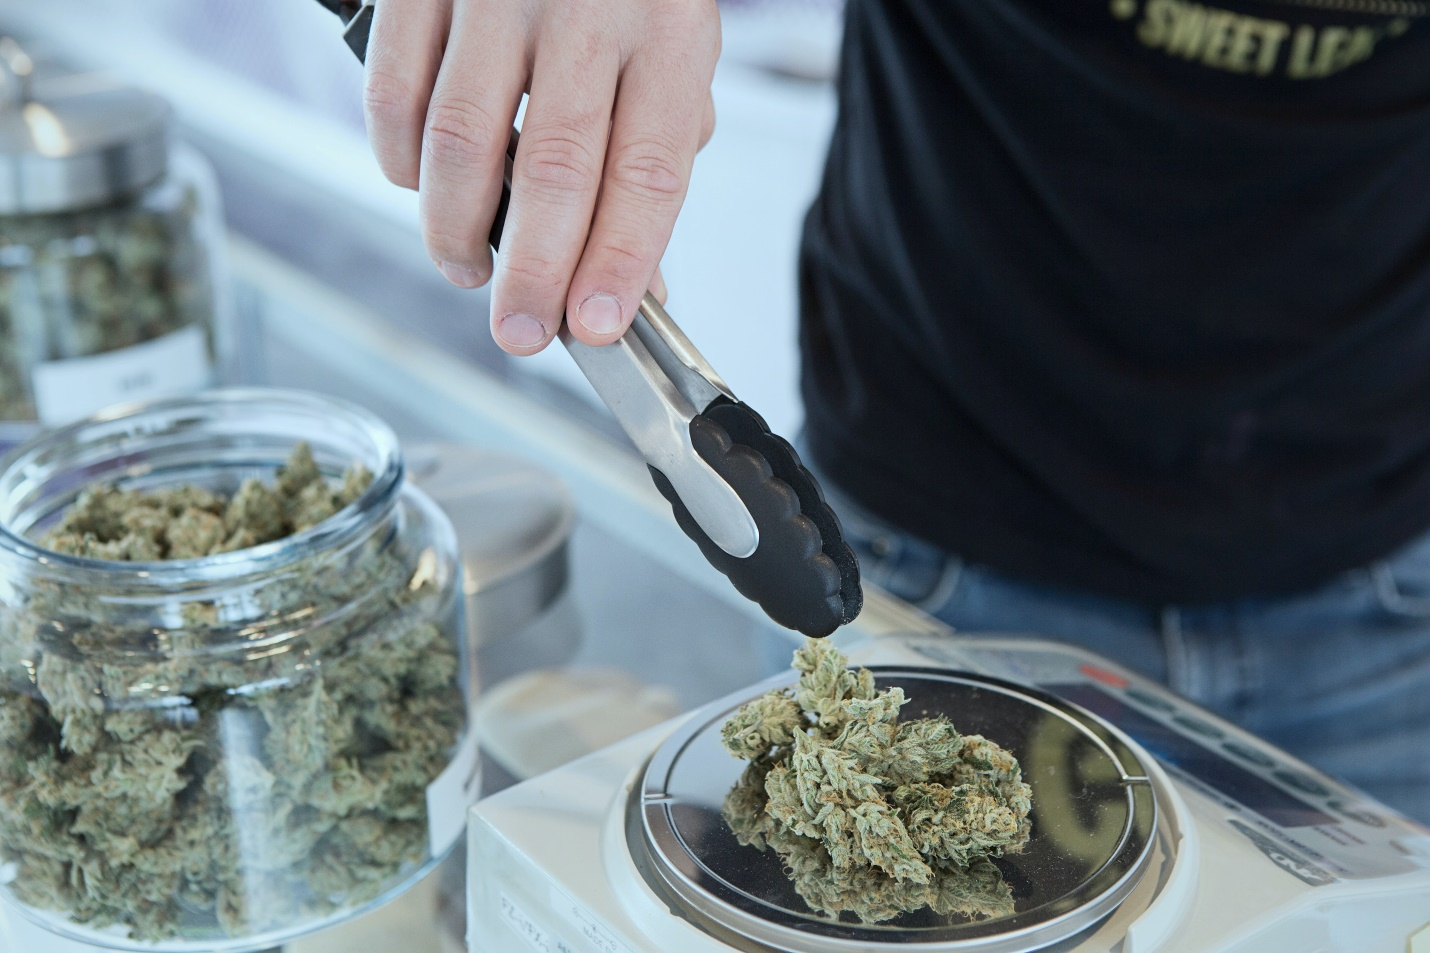 Close-up of person’s hand holding tongs and kush.